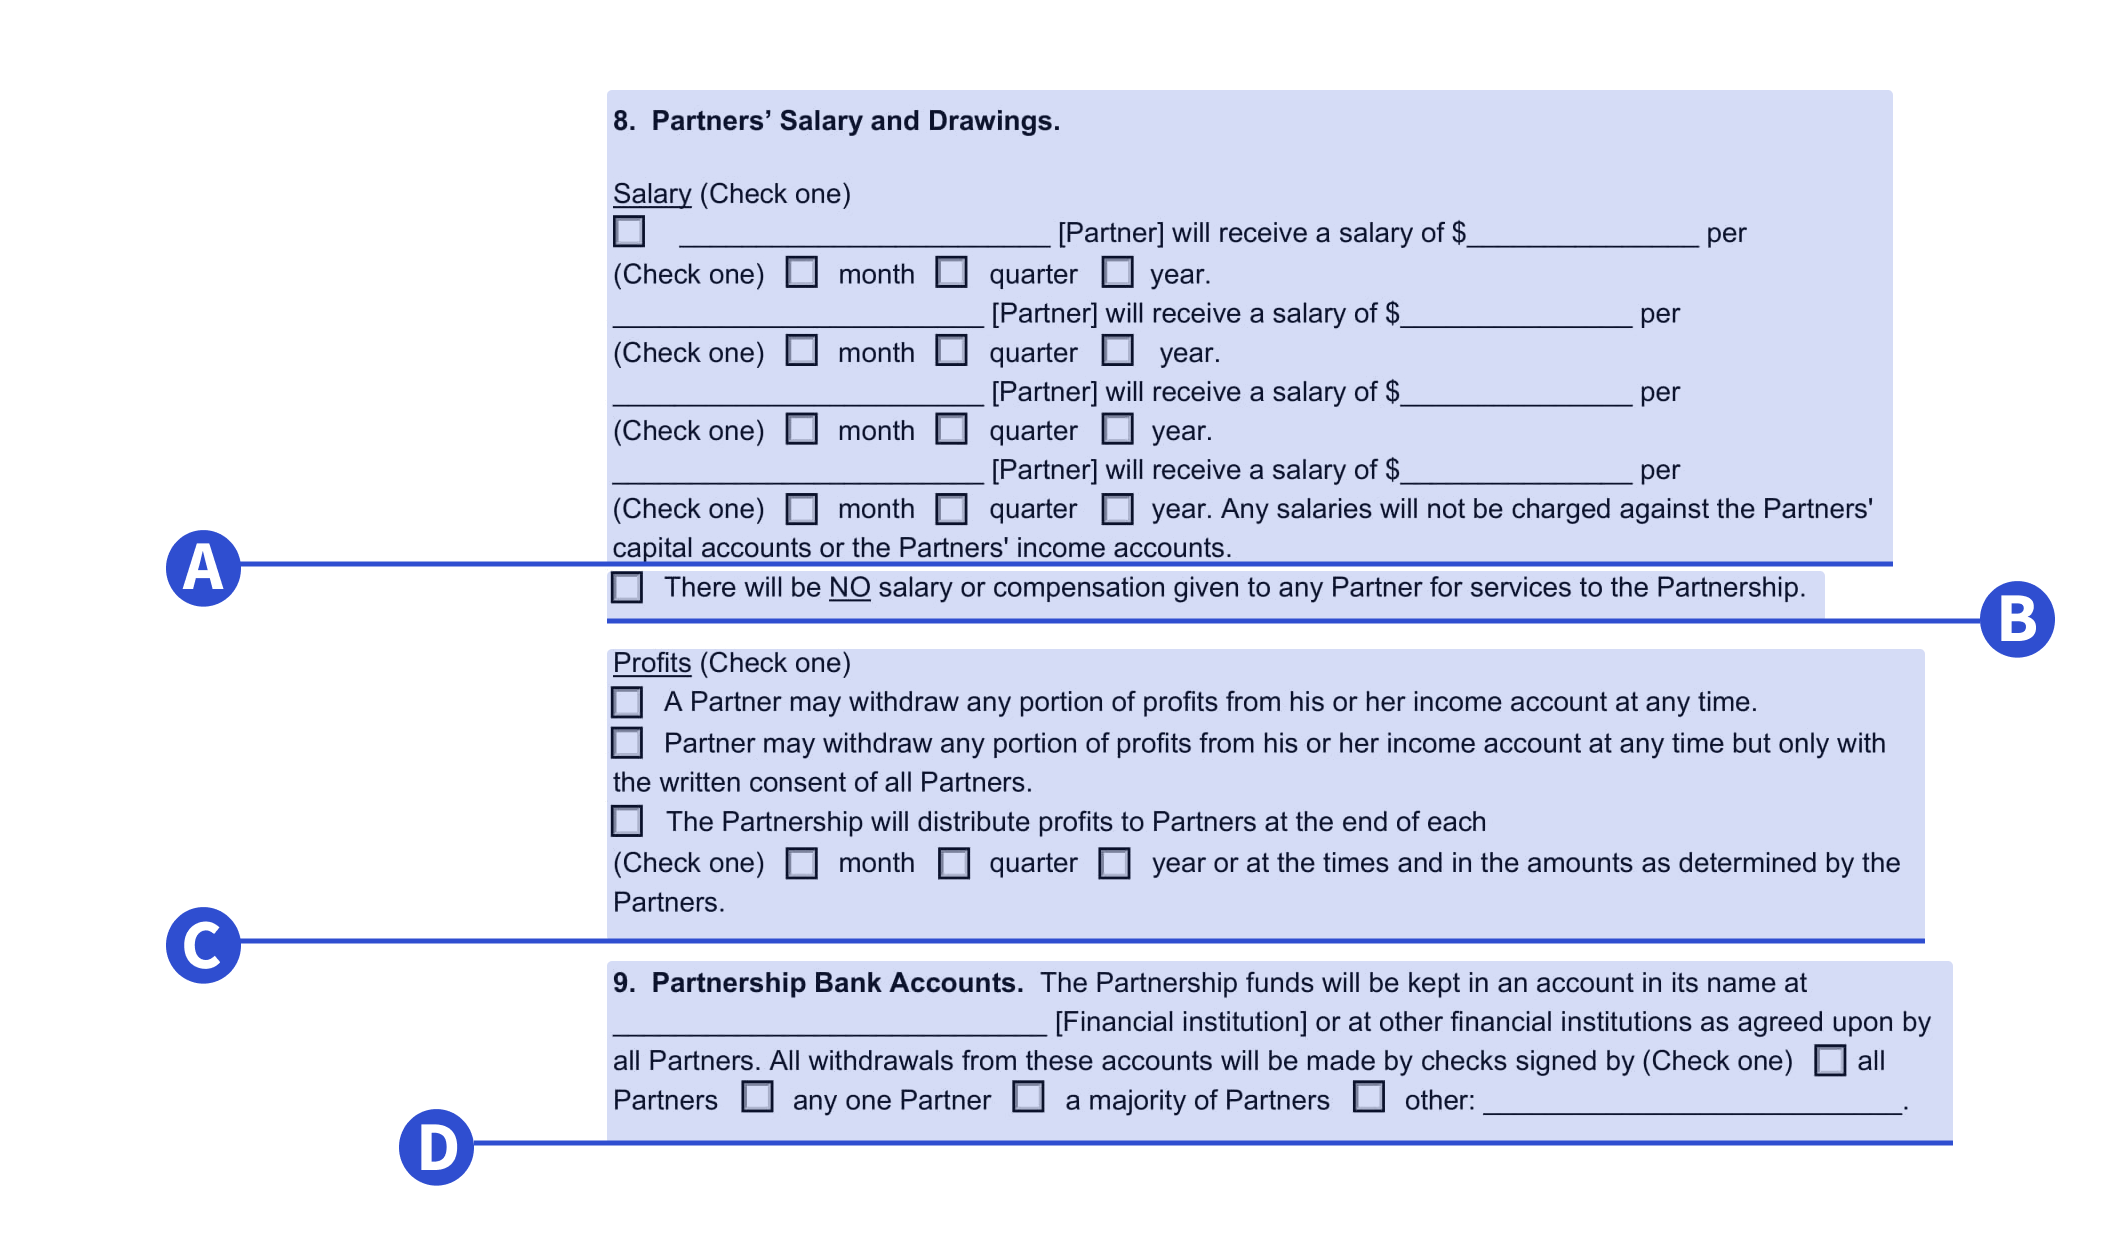 Where to detail partners’ salary and drawings and partnership bank account information in our 50-50 template.